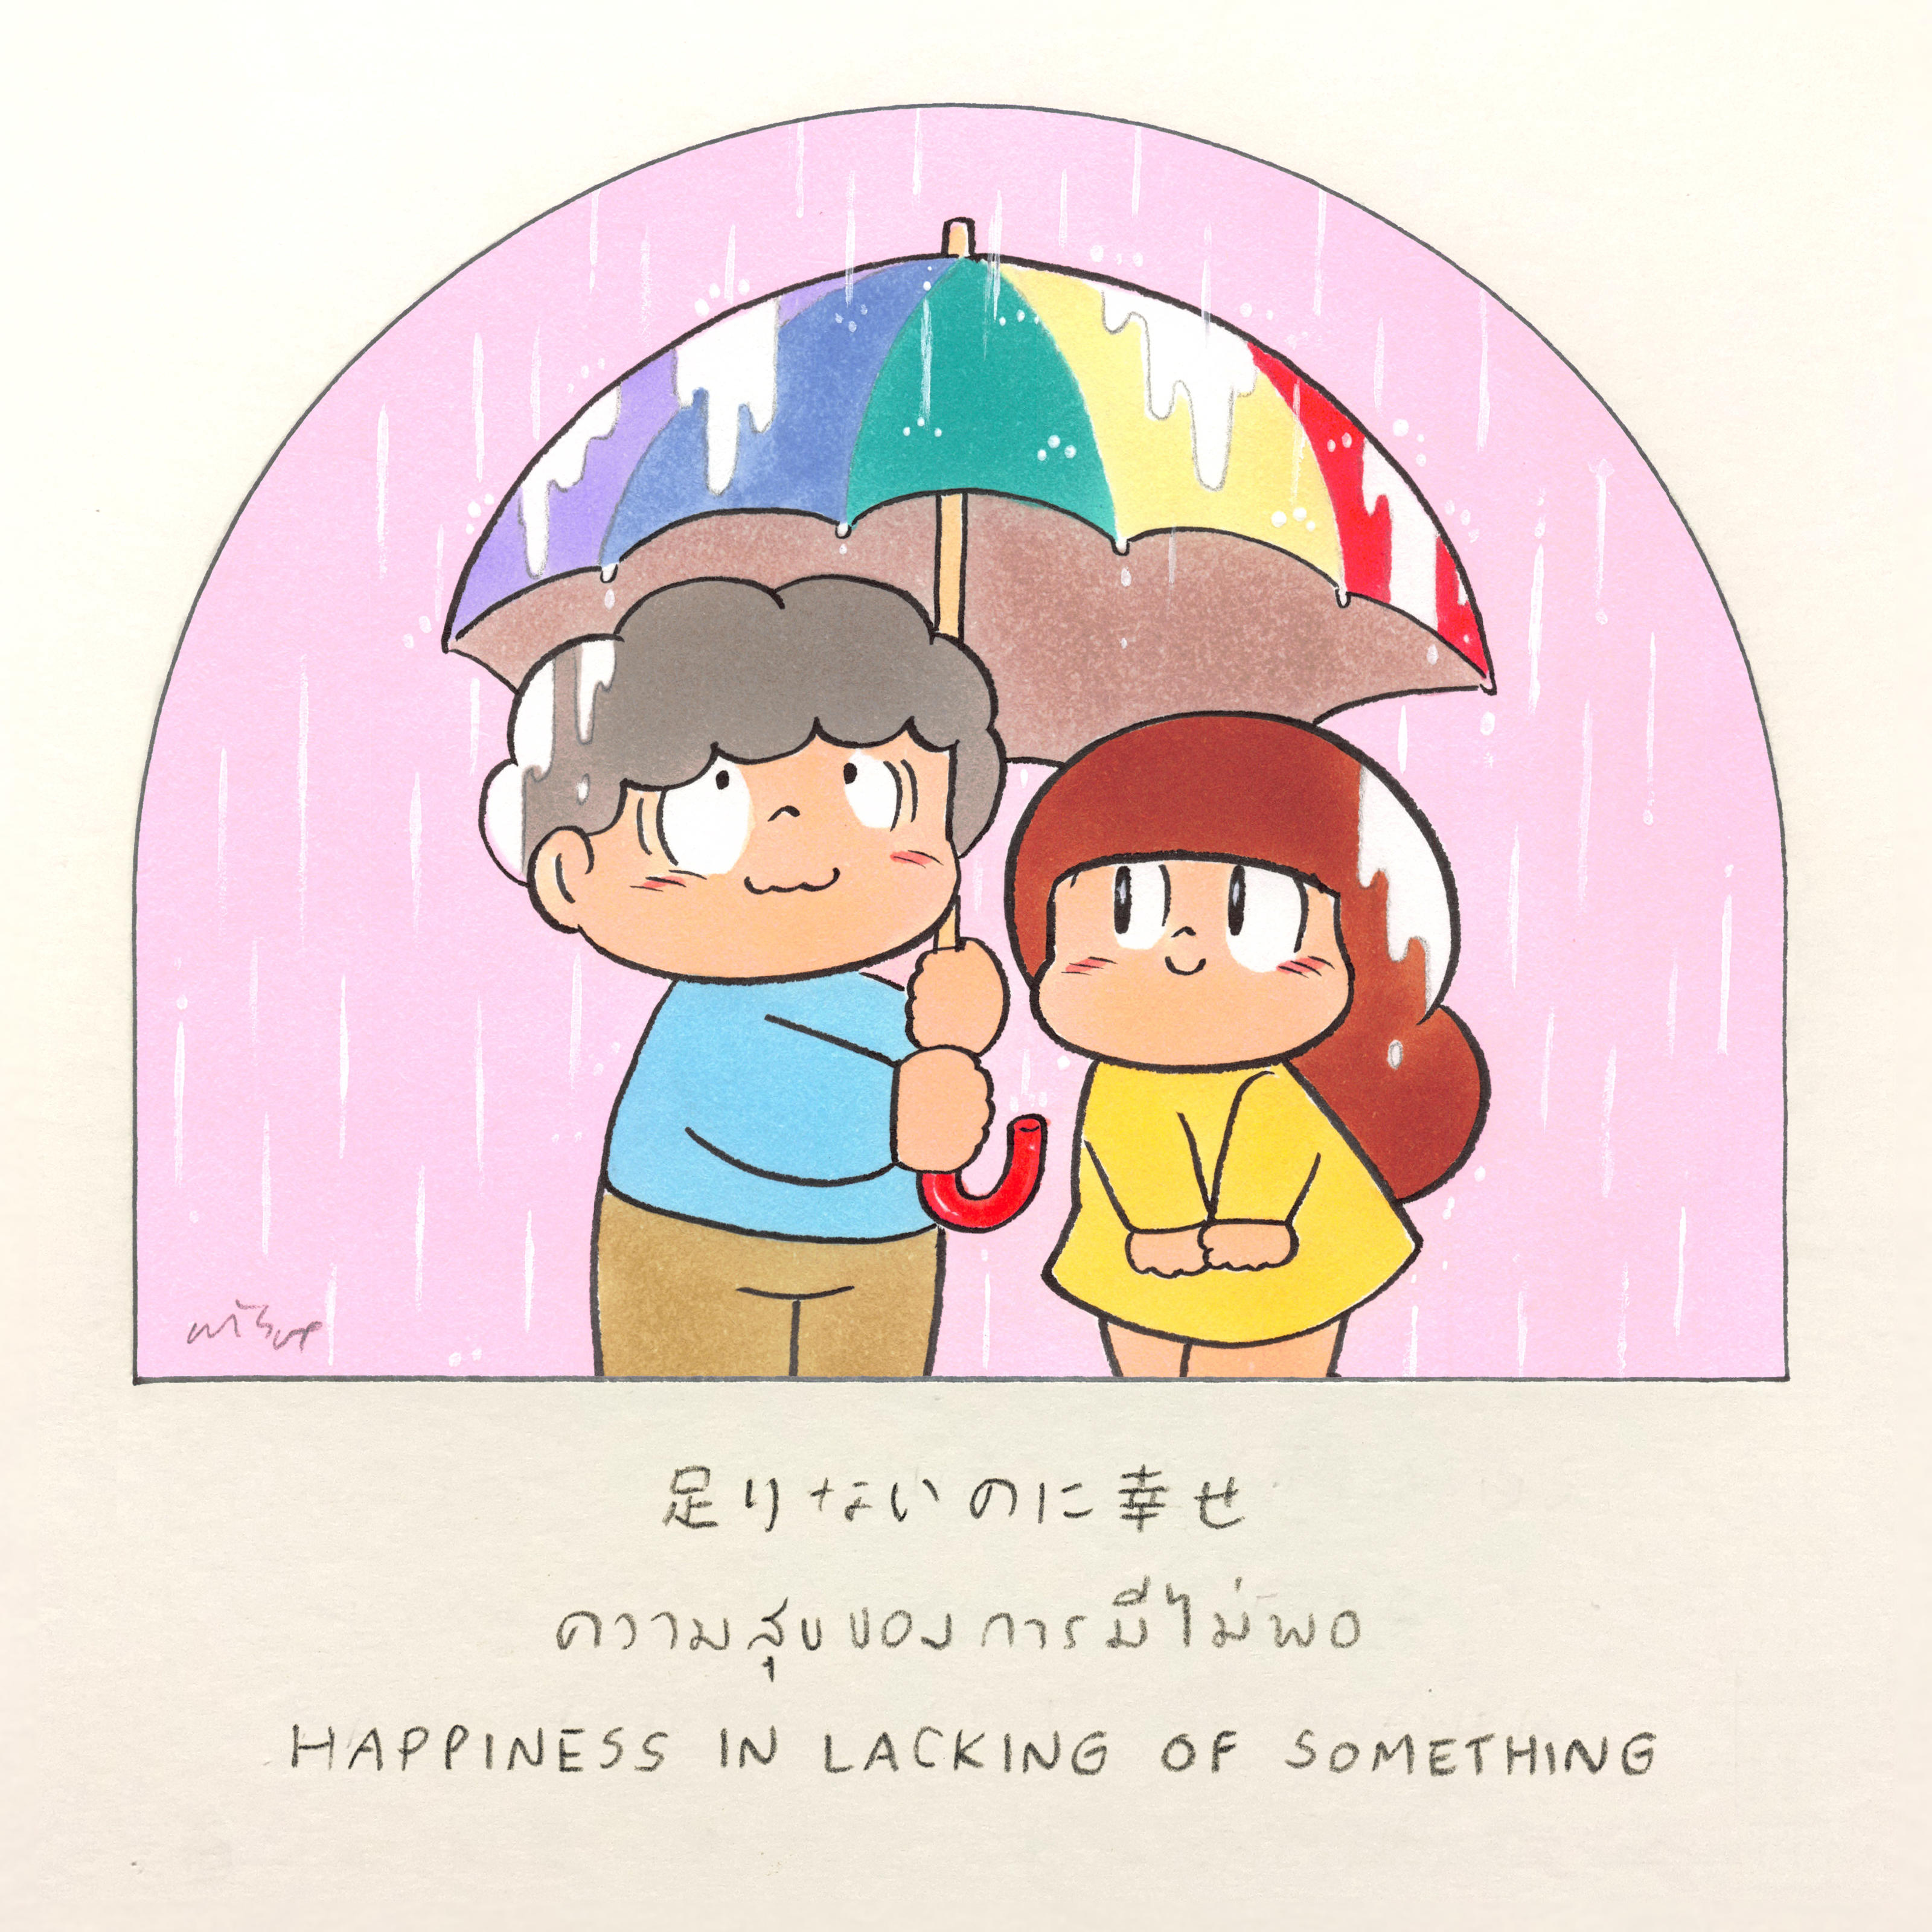 《Happiness in lacking of something》